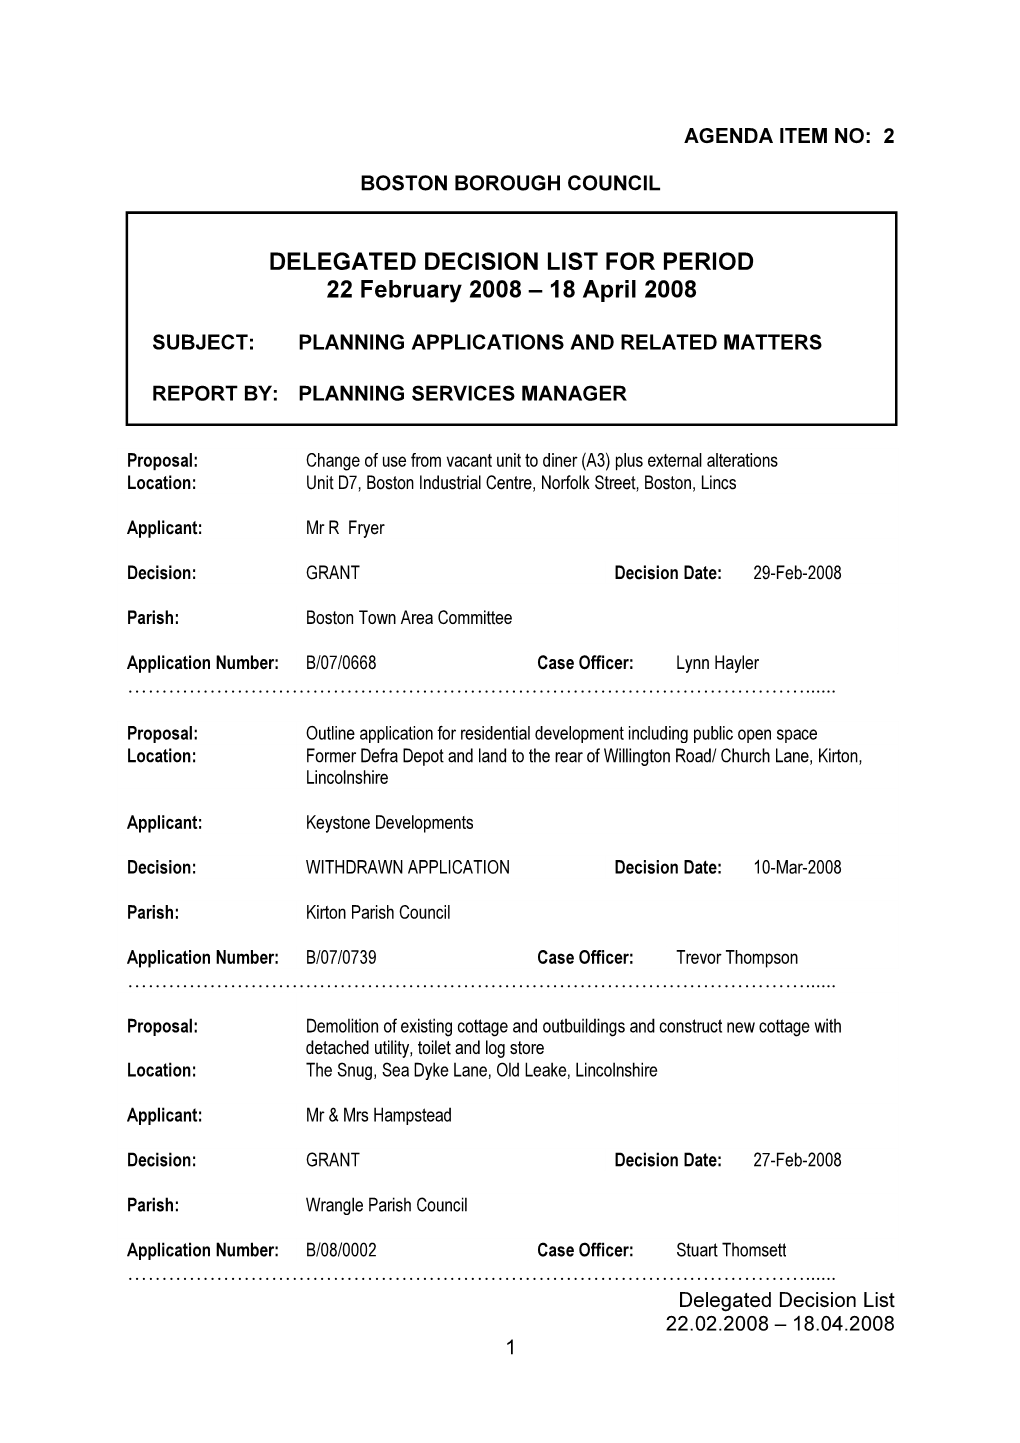 DELEGATED DECISION LIST for PERIOD 22 February 2008 – 18 April 2008